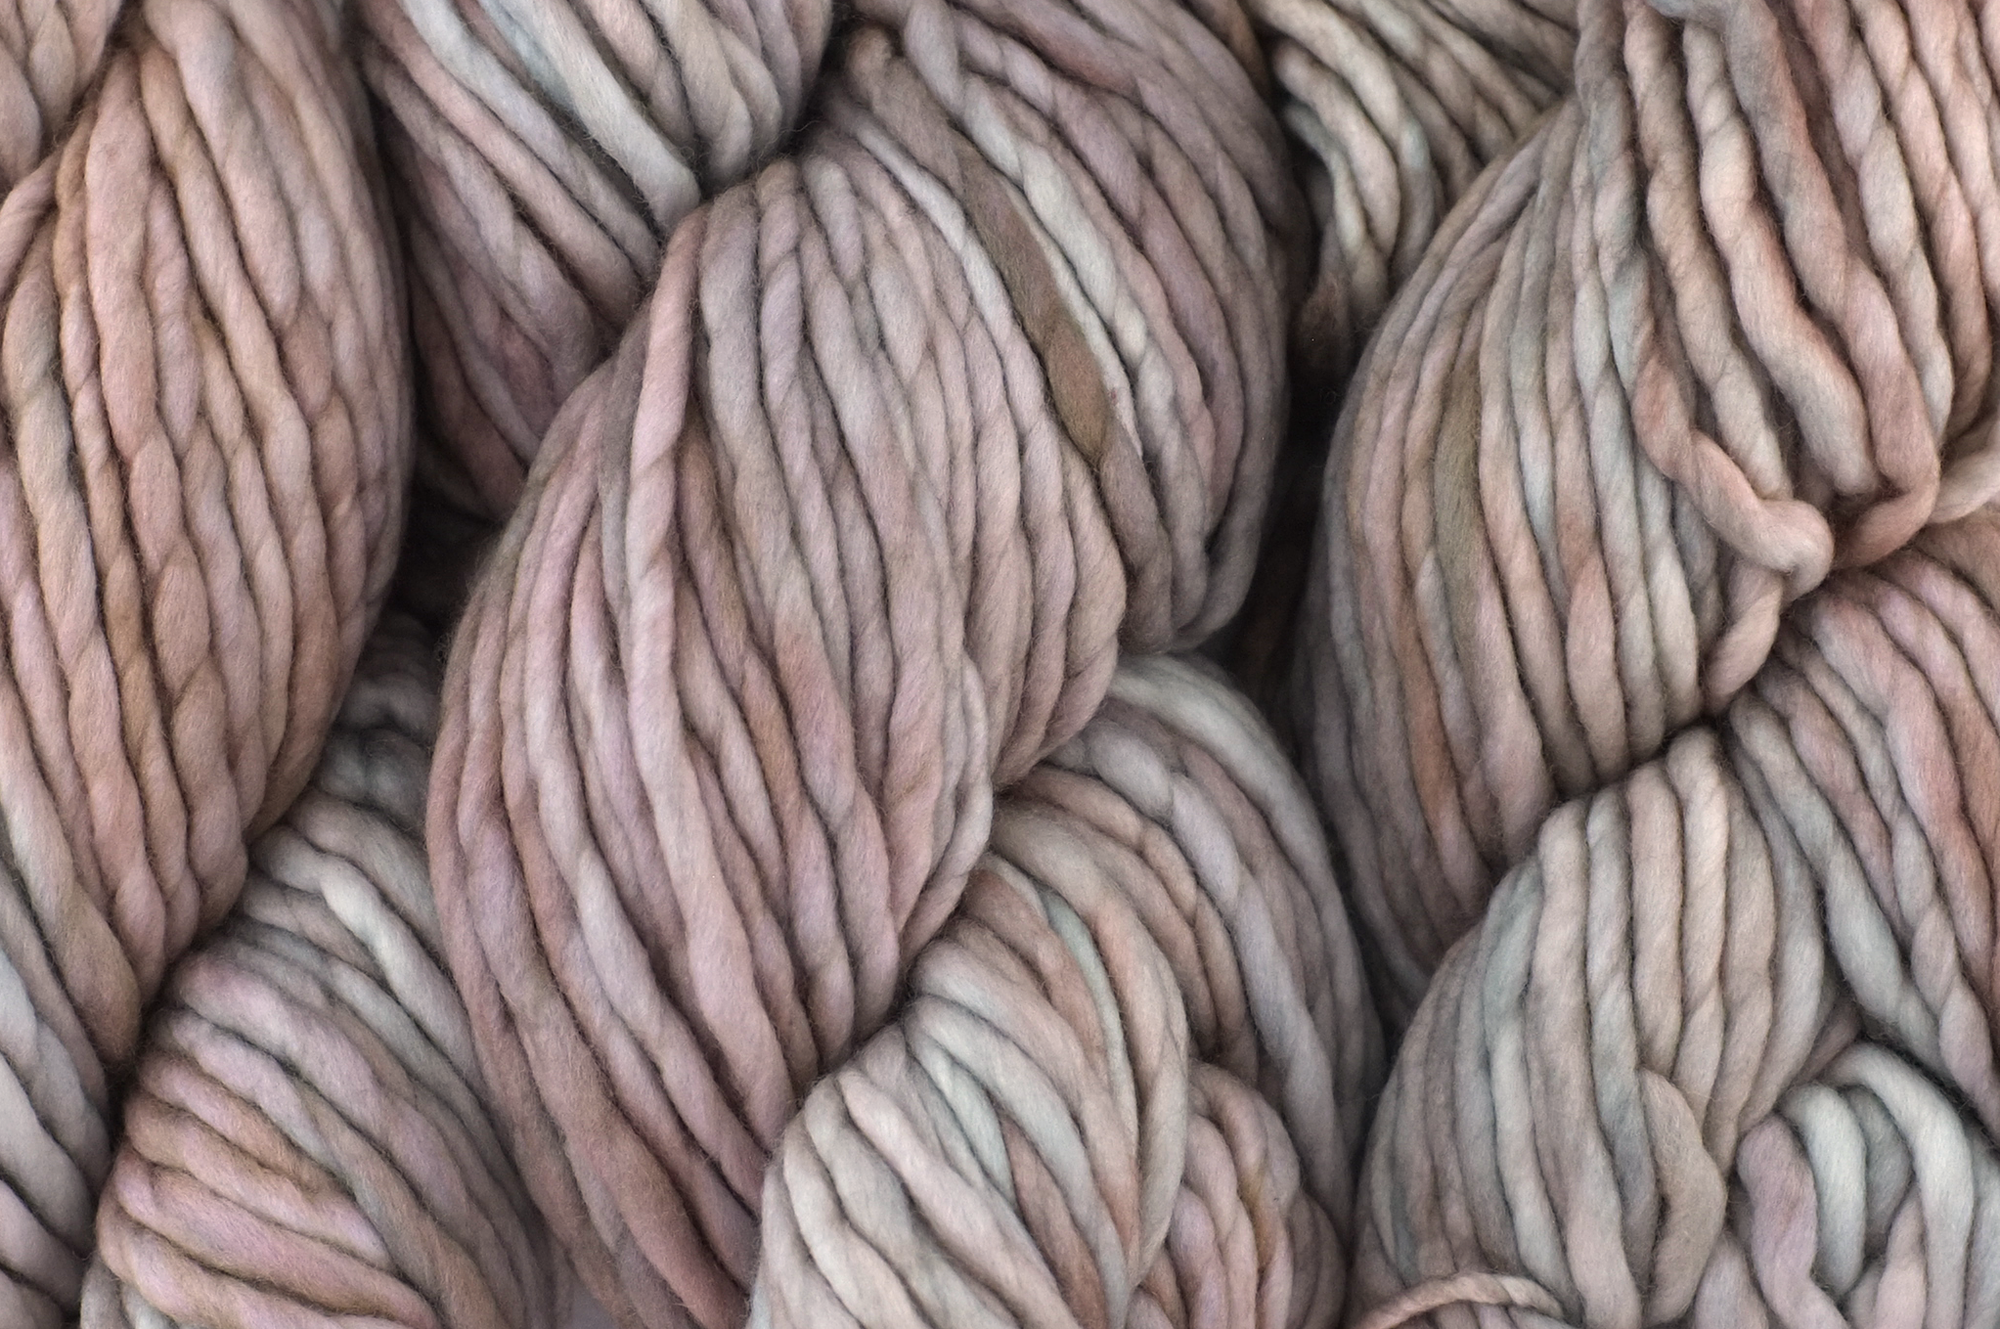 Malabrigo Chunky in color Whole Grain, Bulky Weight Merino Wool Knitting  Yarn, beige shades, #696 Red Beauty Textiles